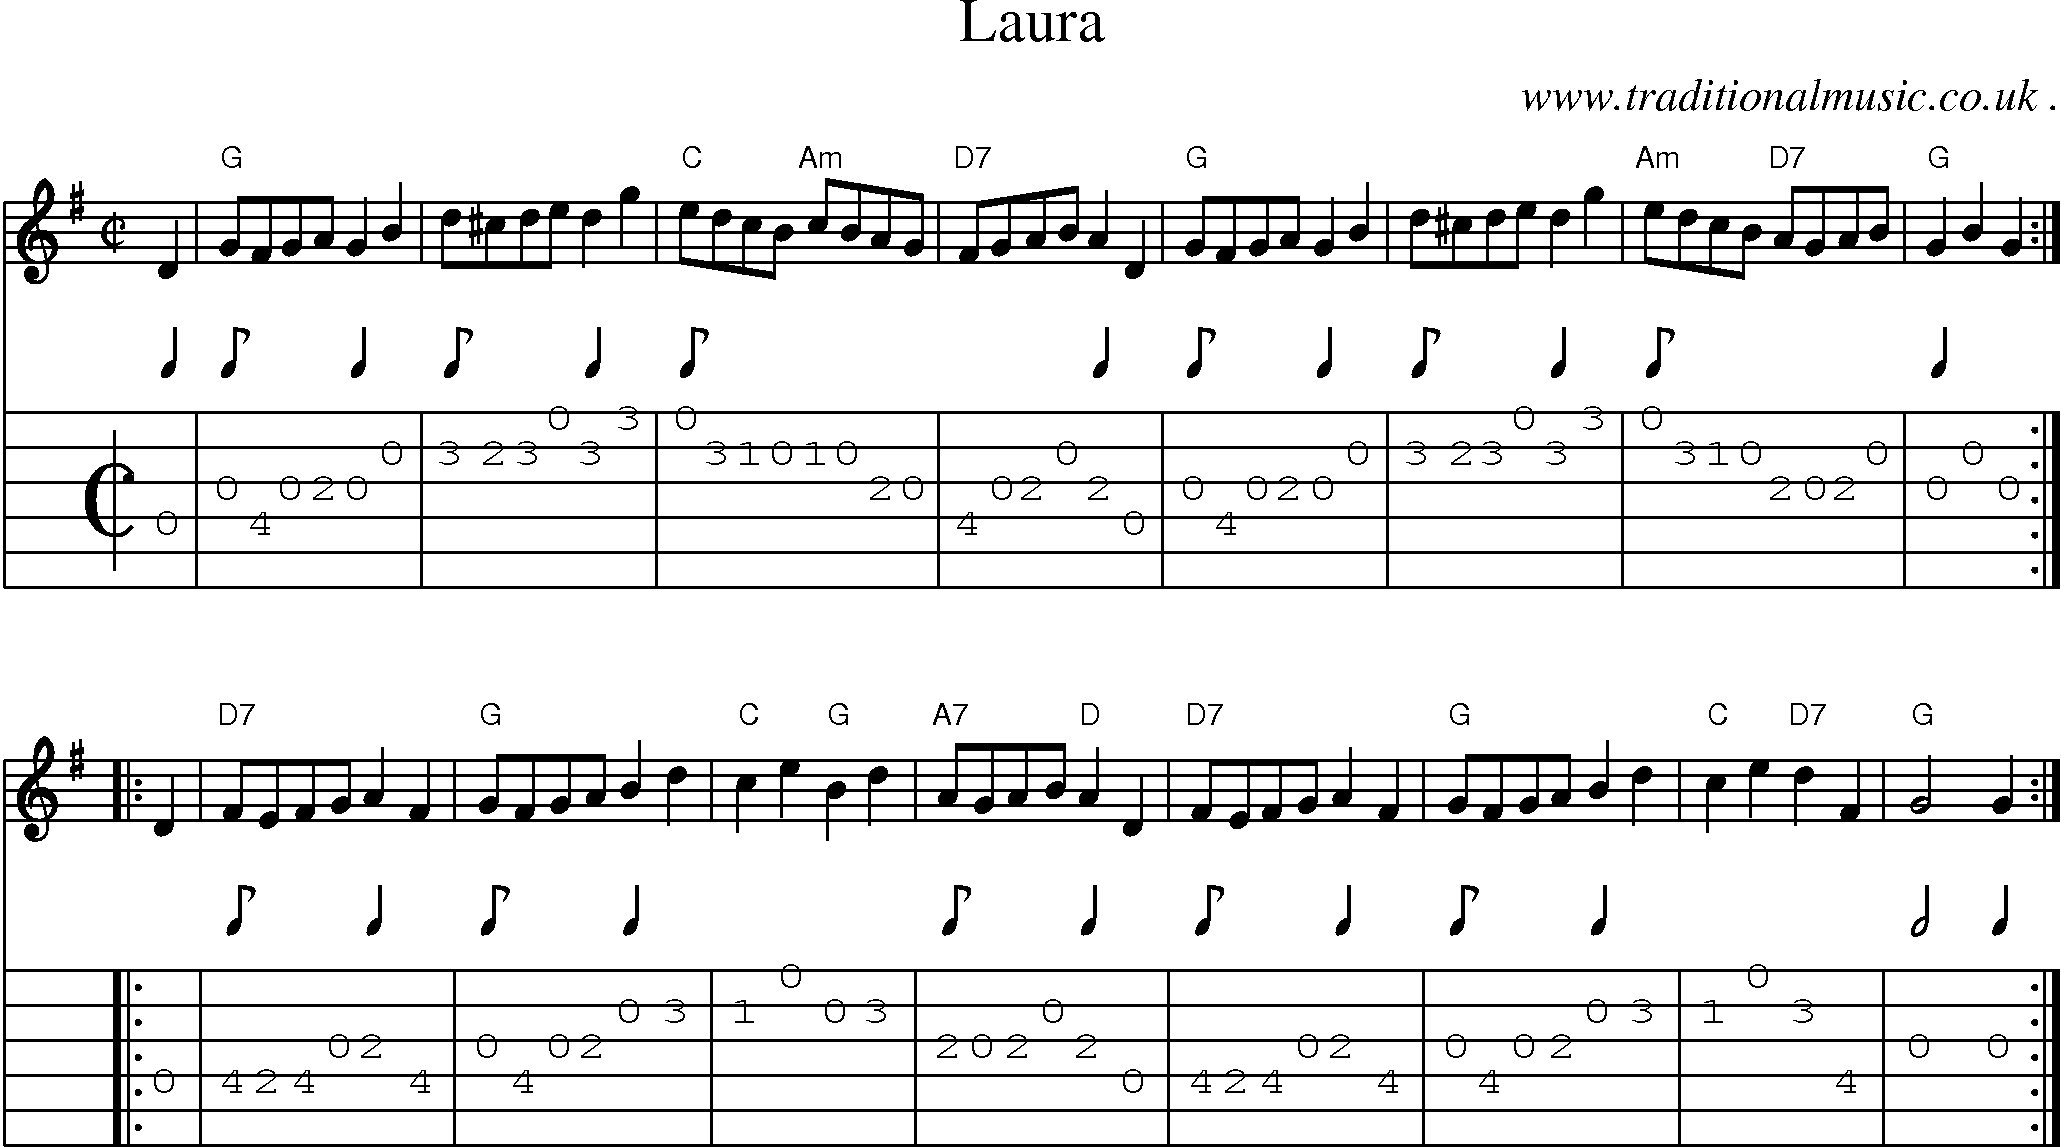 Sheet-music  score, Chords and Guitar Tabs for Laura